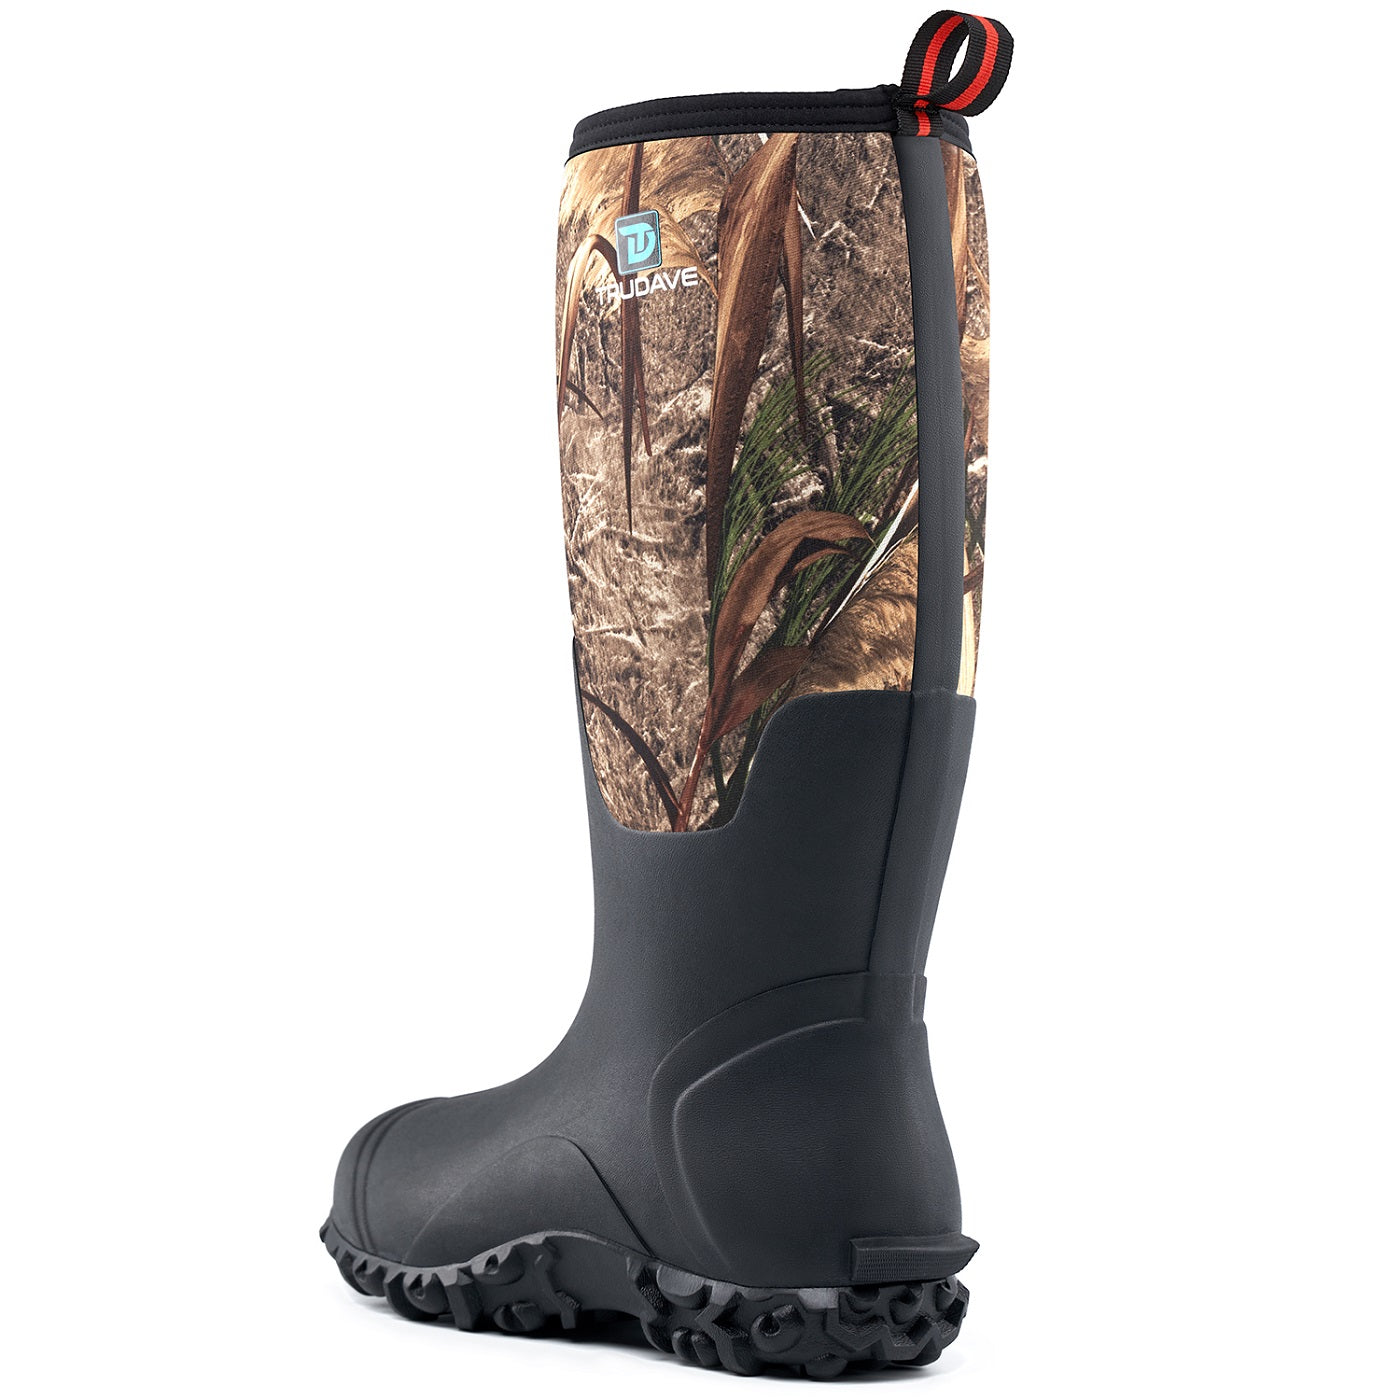 Trudave Real Reed Men's Rubber Hunting Boots with Steel Shank